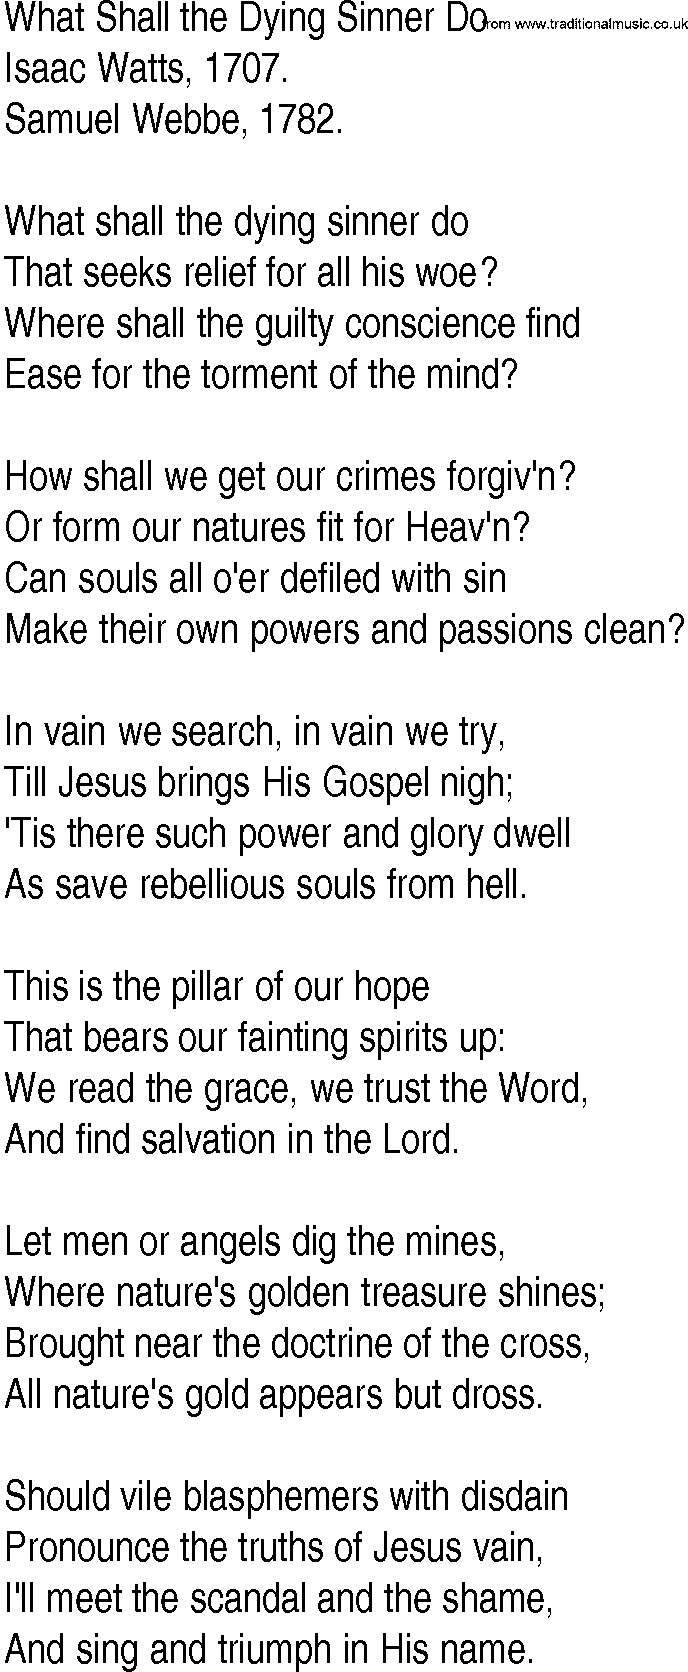 Hymn and Gospel Song: What Shall the Dying Sinner Do by Isaac Watts lyrics